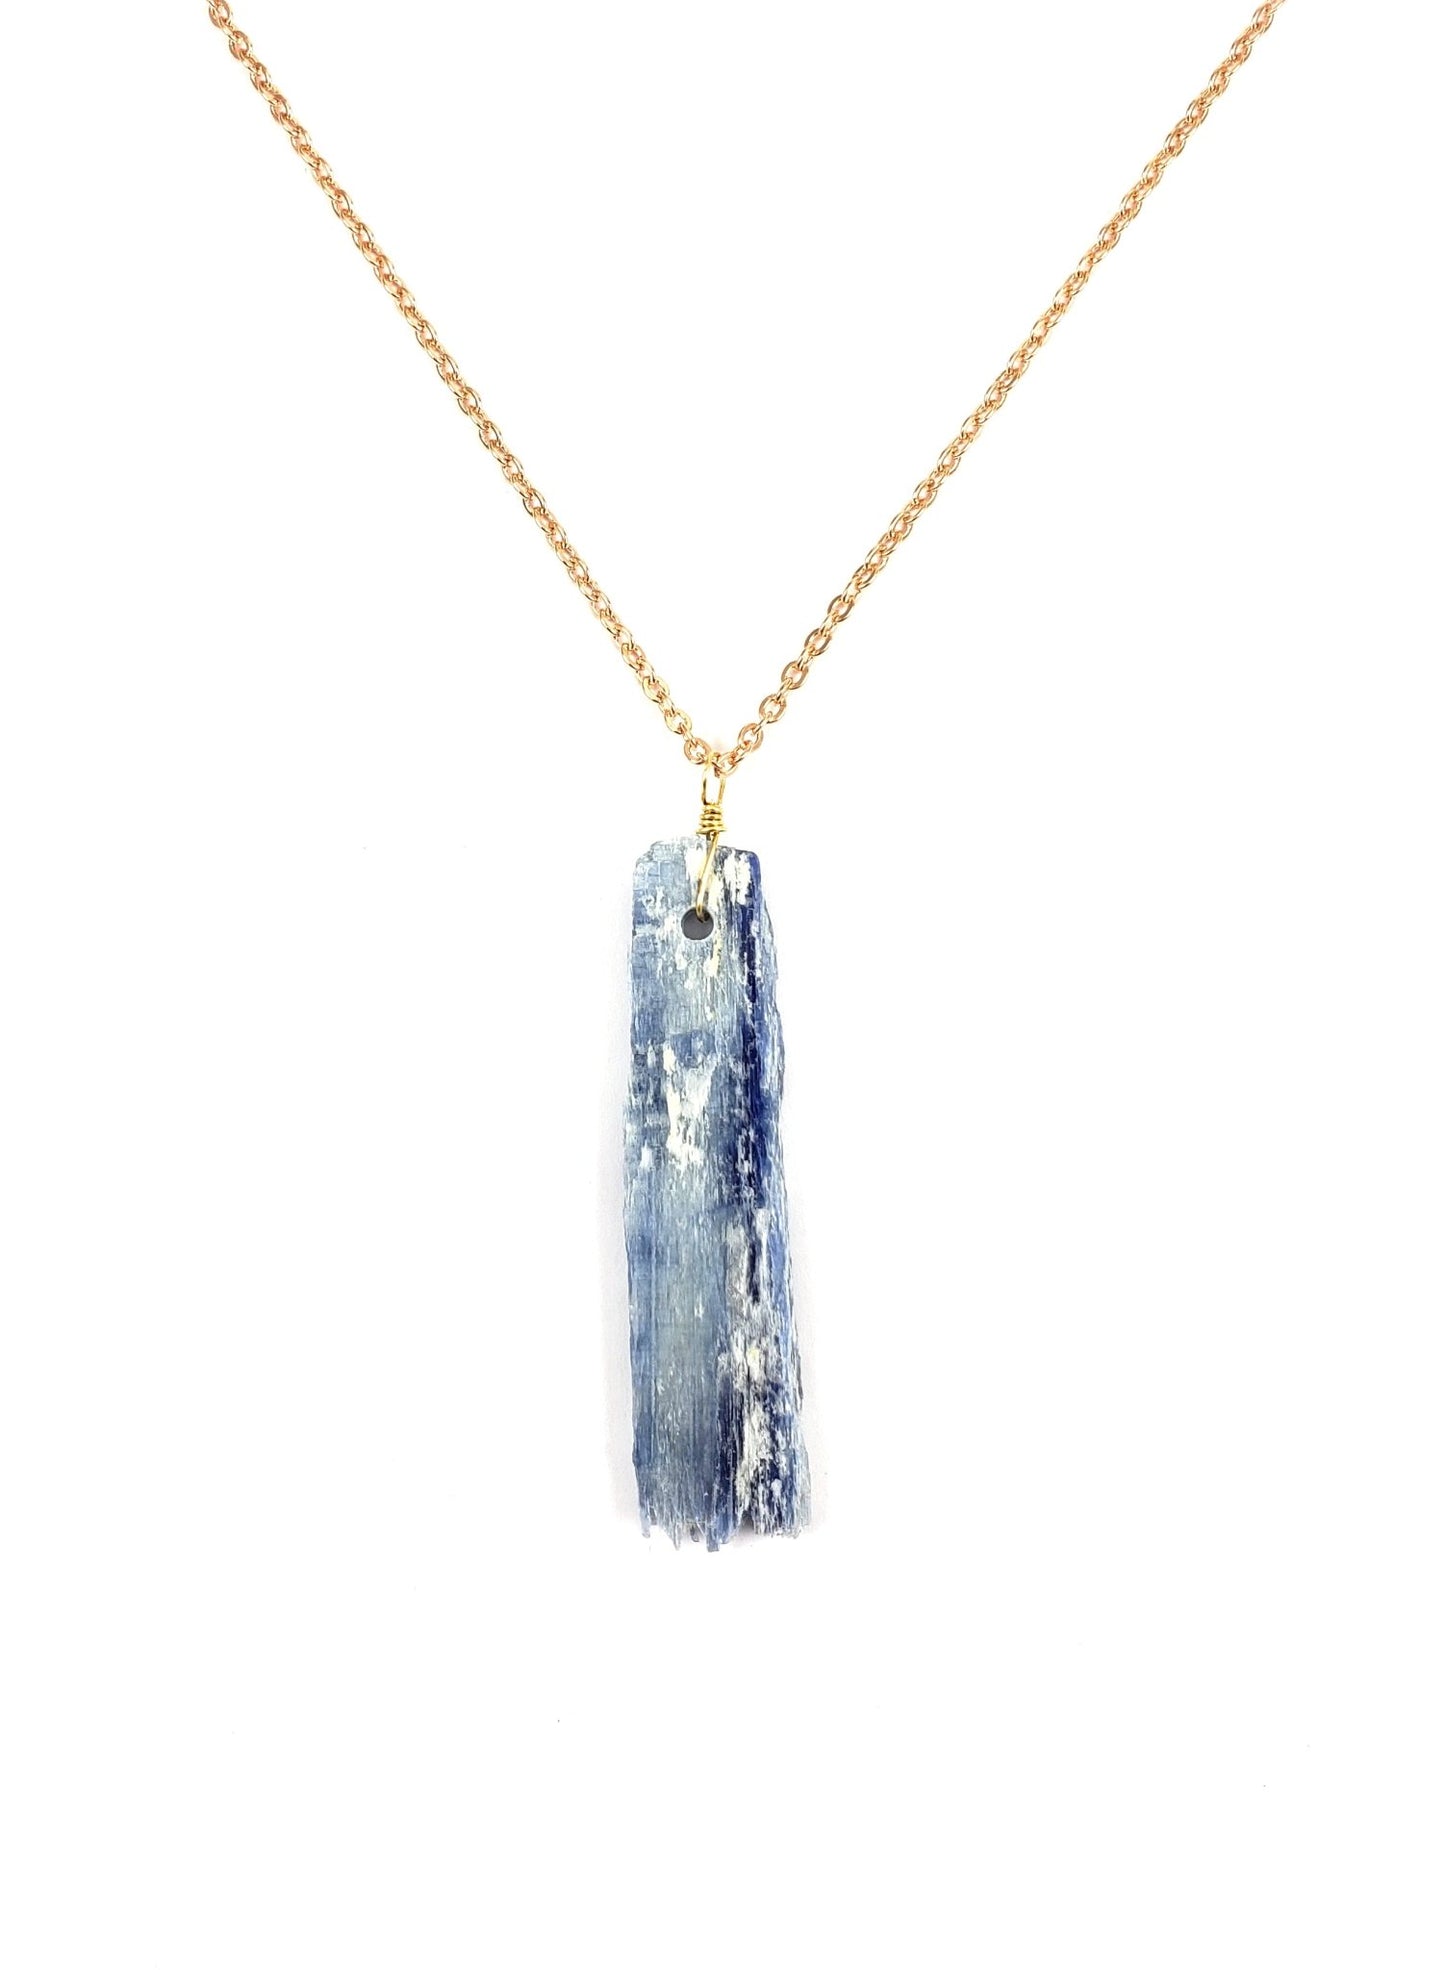 Blue Kyanite Necklace - Ariana Ost